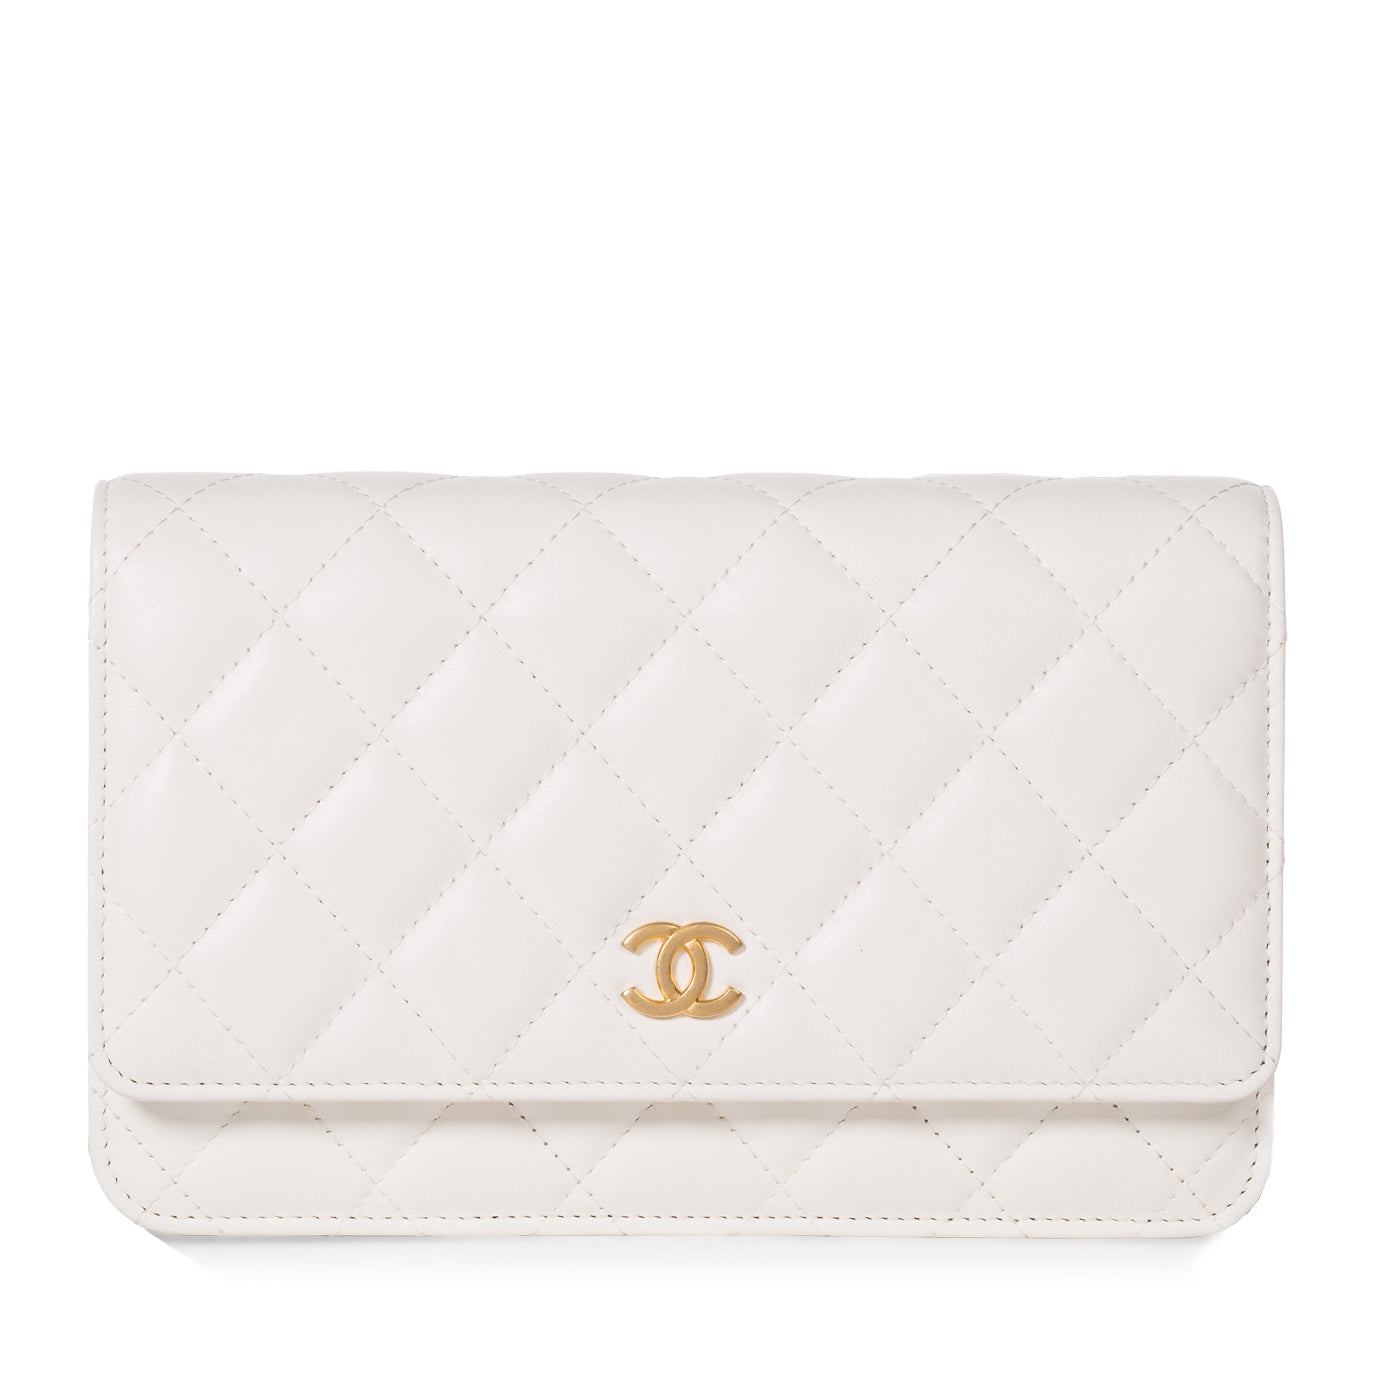 Chanel - WOC - Lambskin - White - AGHW - Fringed Leather Shoulder